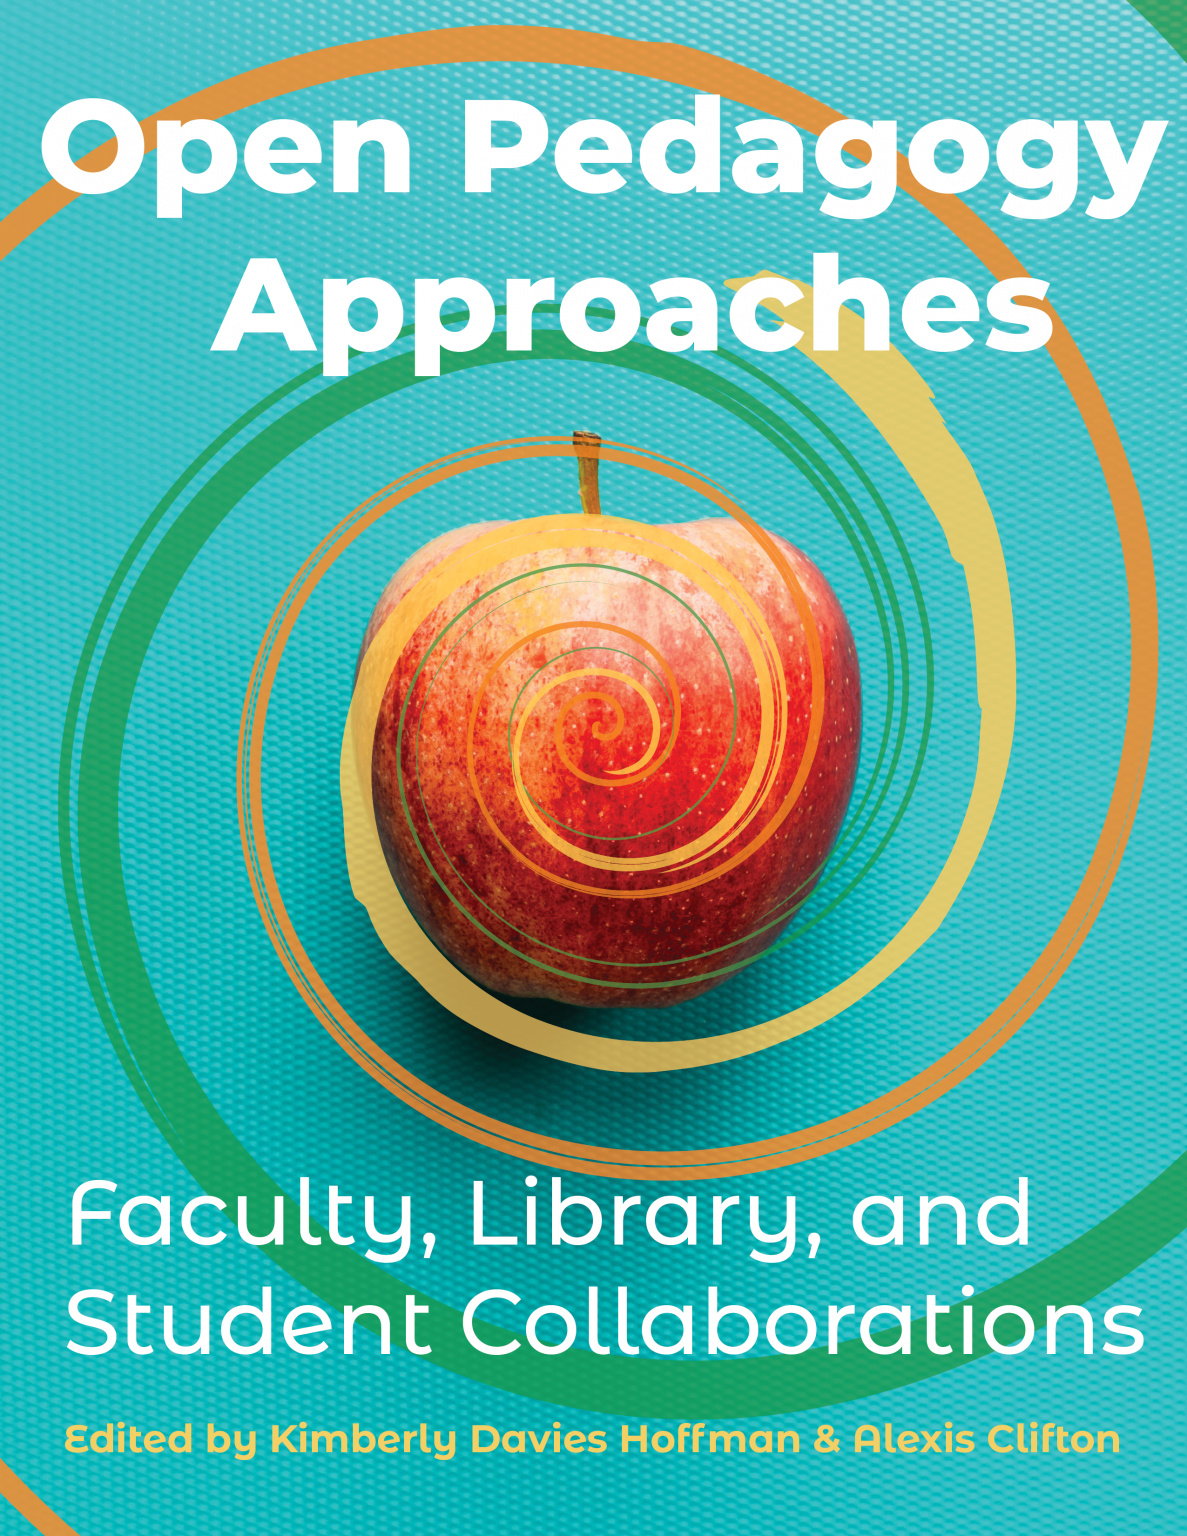 Faculty-librarian Collaborations (a Review Of Teaching